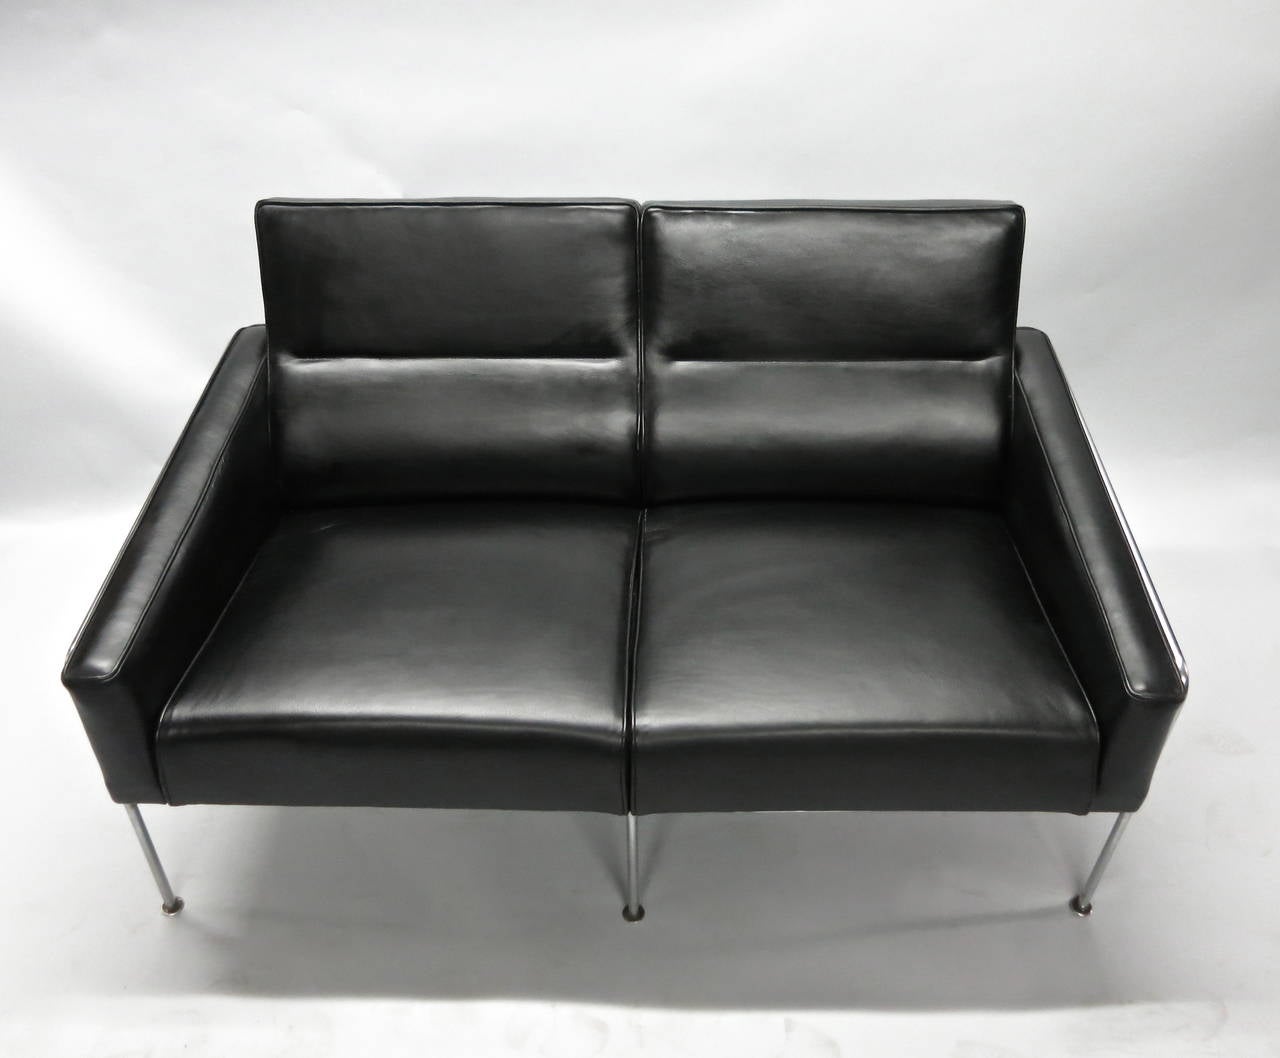 Vintage two-seat settee model 3302 designed by Arne Jacobsen and manufactured by Fritz Hansen for the Royal Hotel in Copenhagen. Newly upholstered in black leather and the metal frame is in excellent vintage condition.